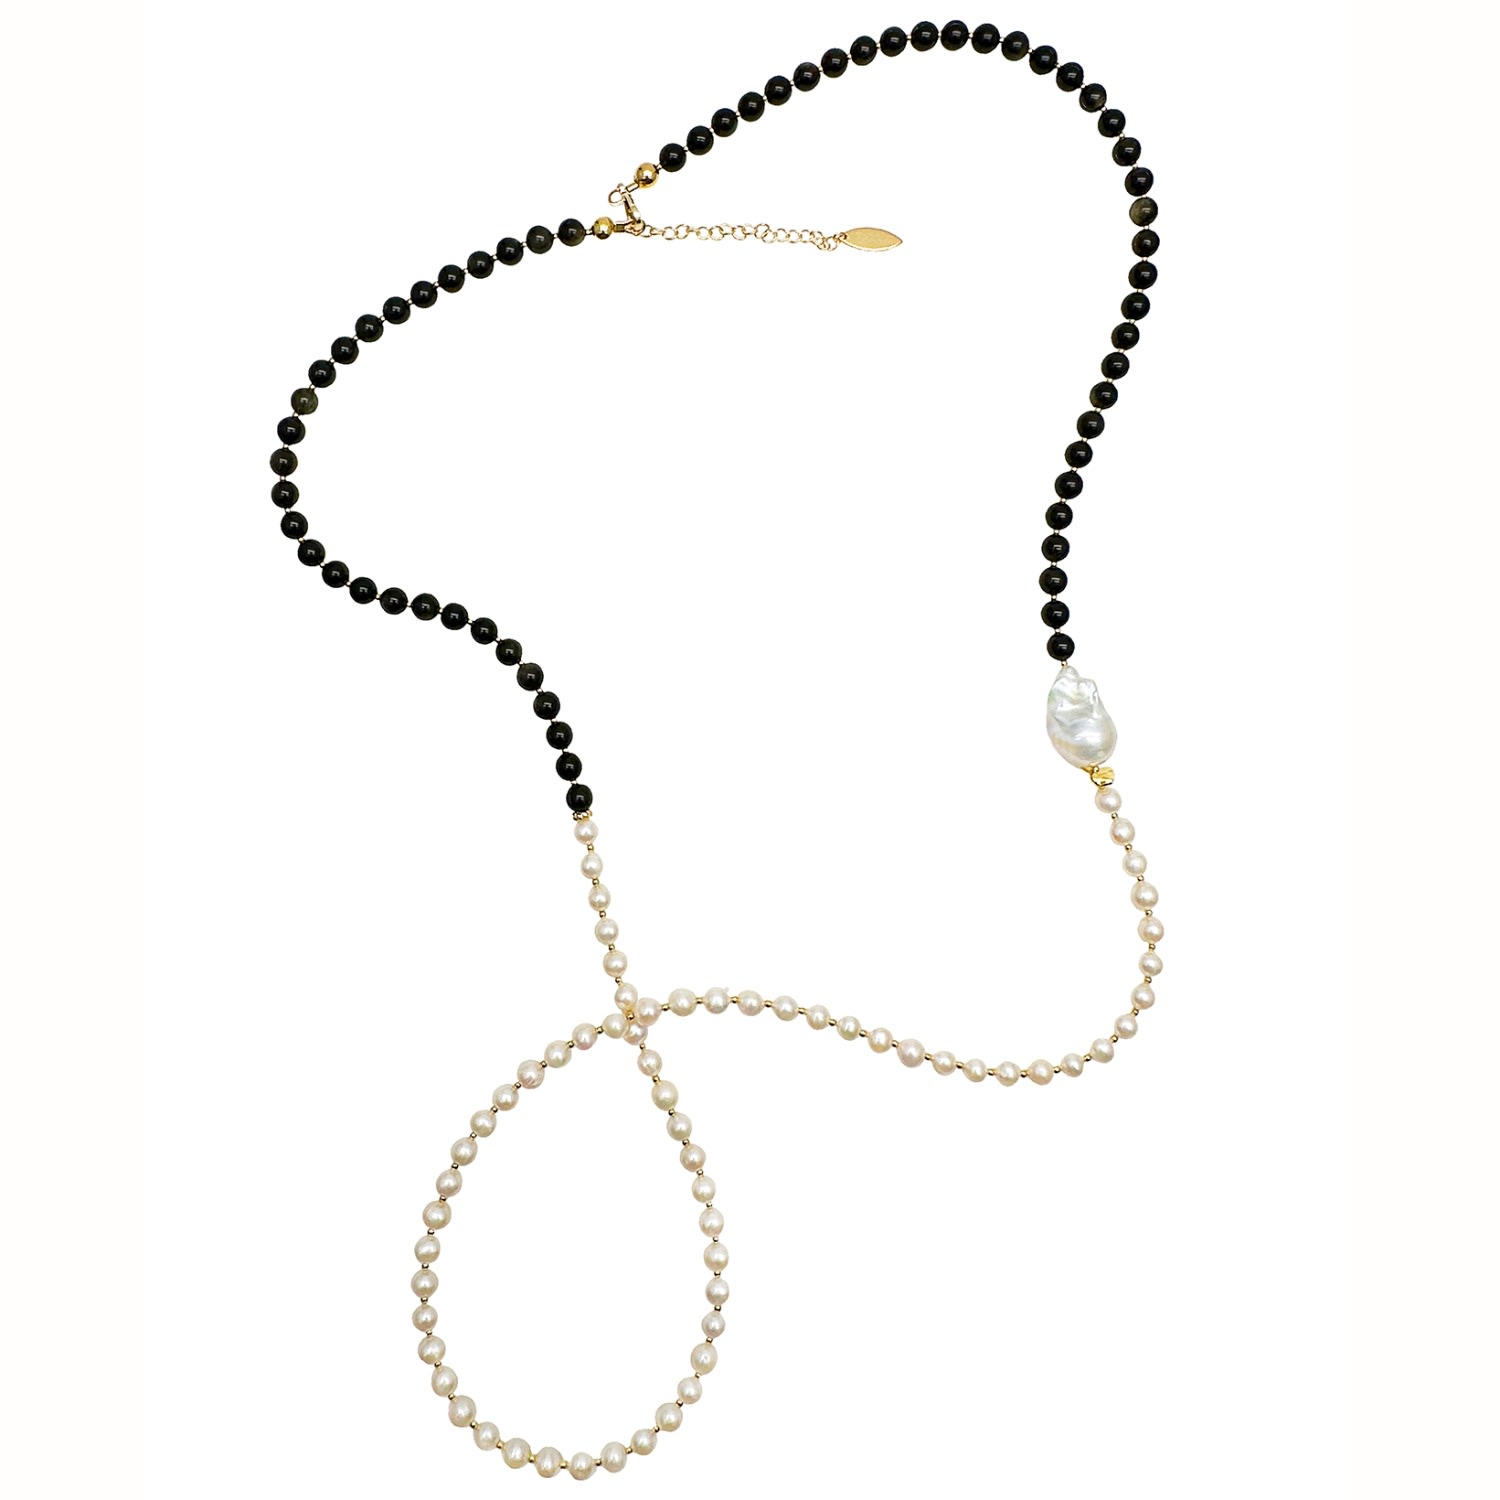 Women's Black / White Black Obsidian And White Freshwater Pearls Long Necklace Farra